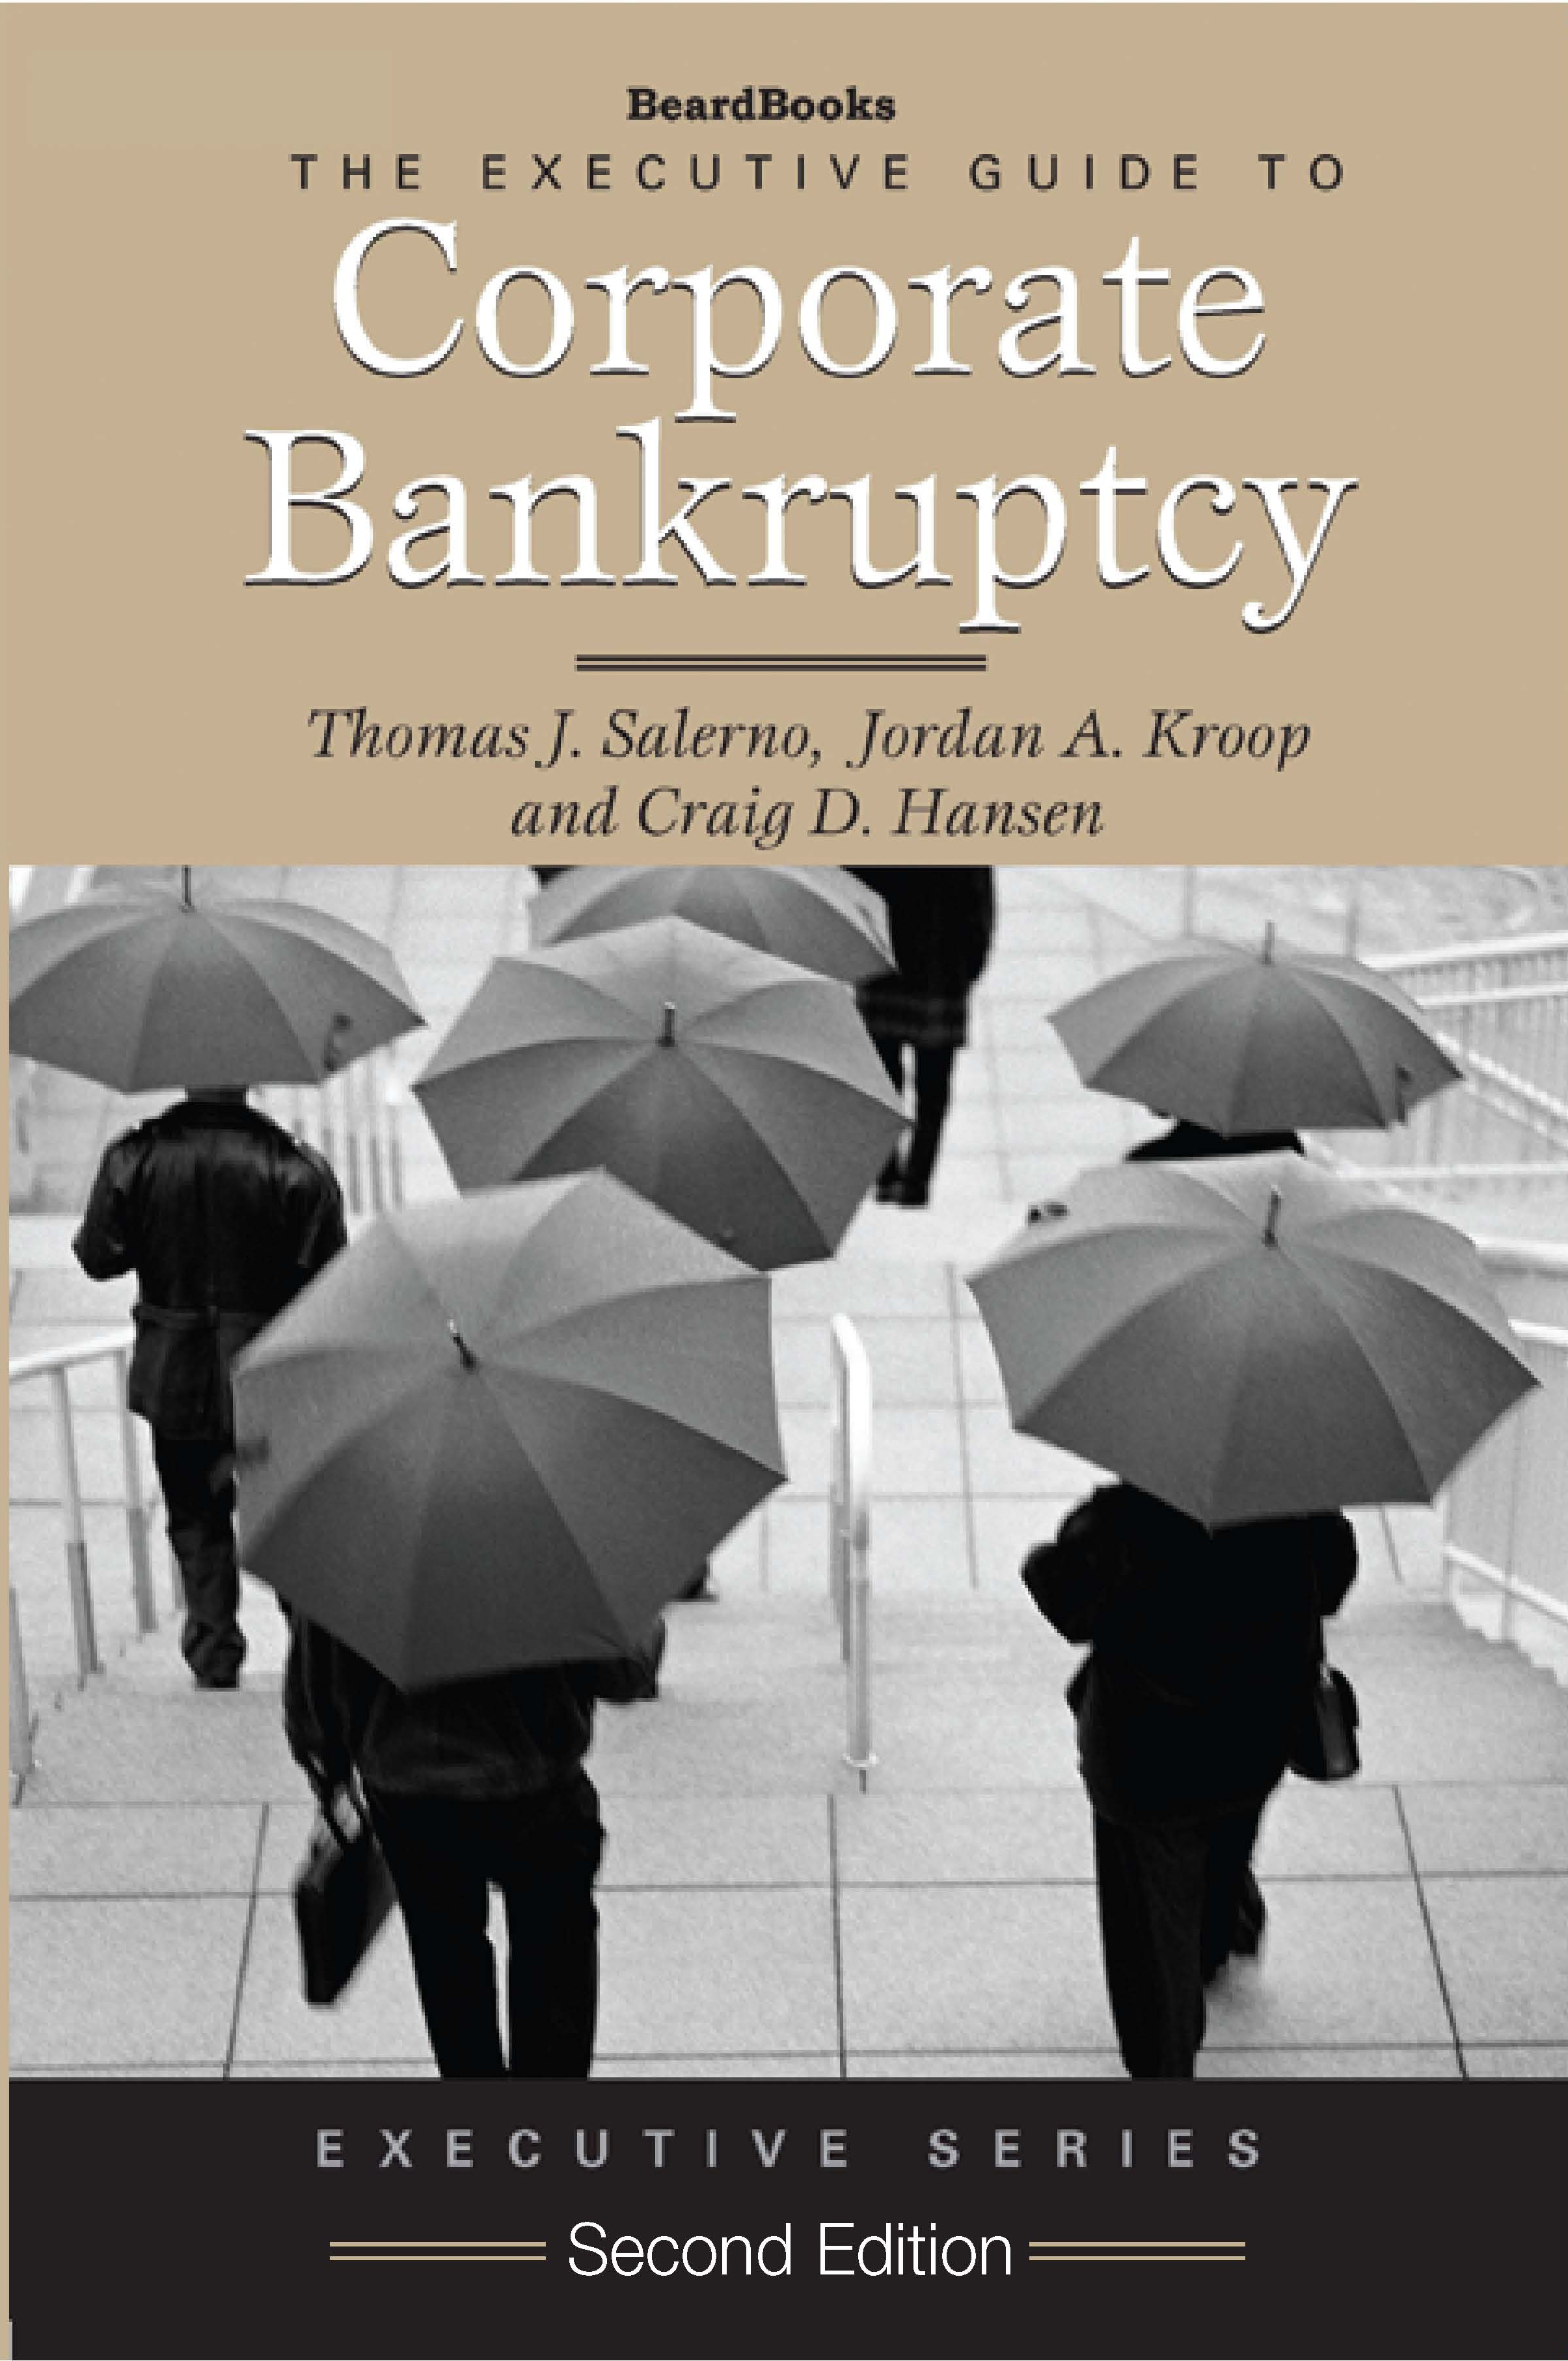 The Executive Guide to Corporate Bankruptcy Second Edition